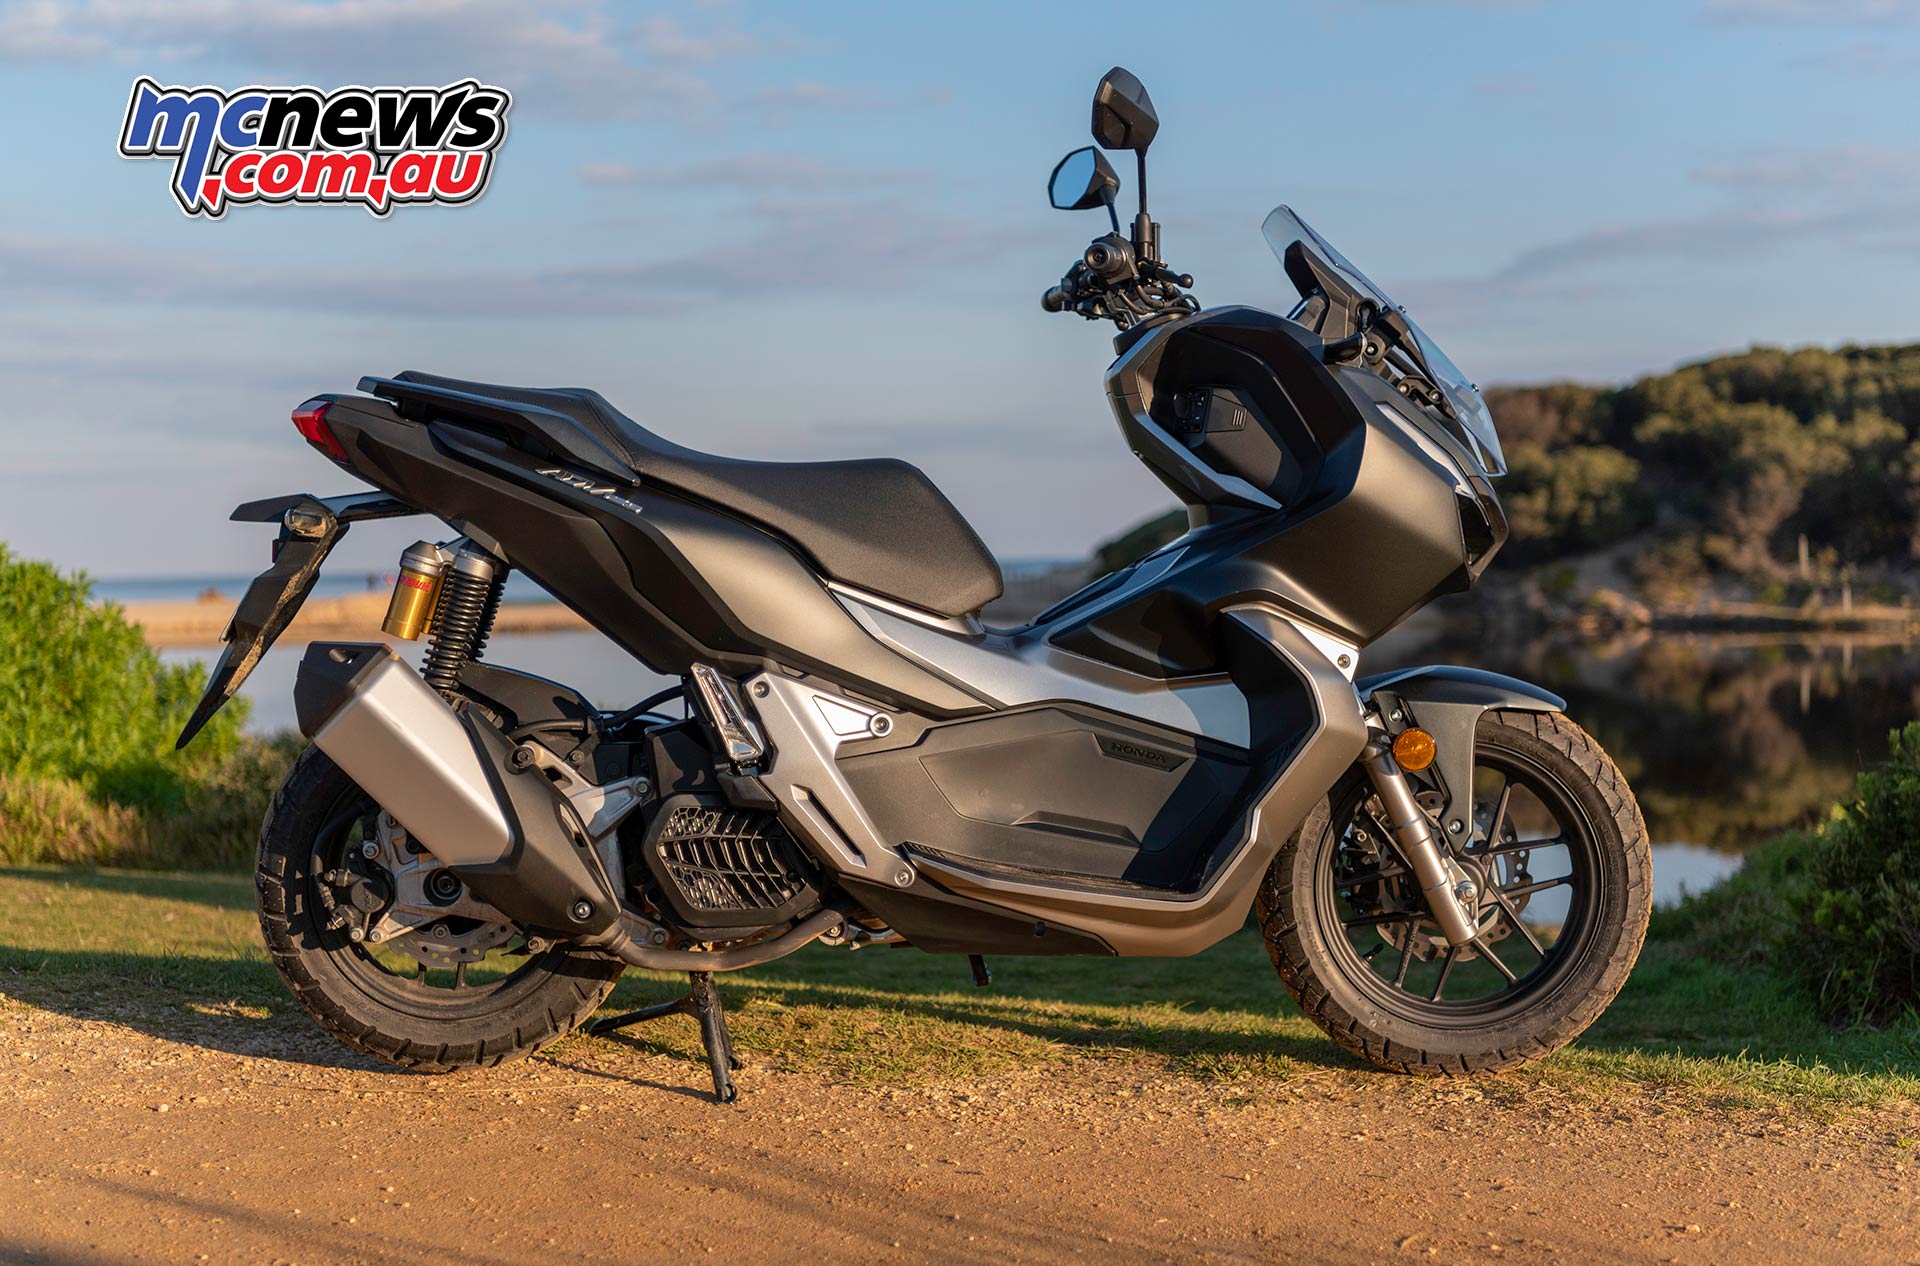 Honda Adv150 Review Scooter Tests Mcnews